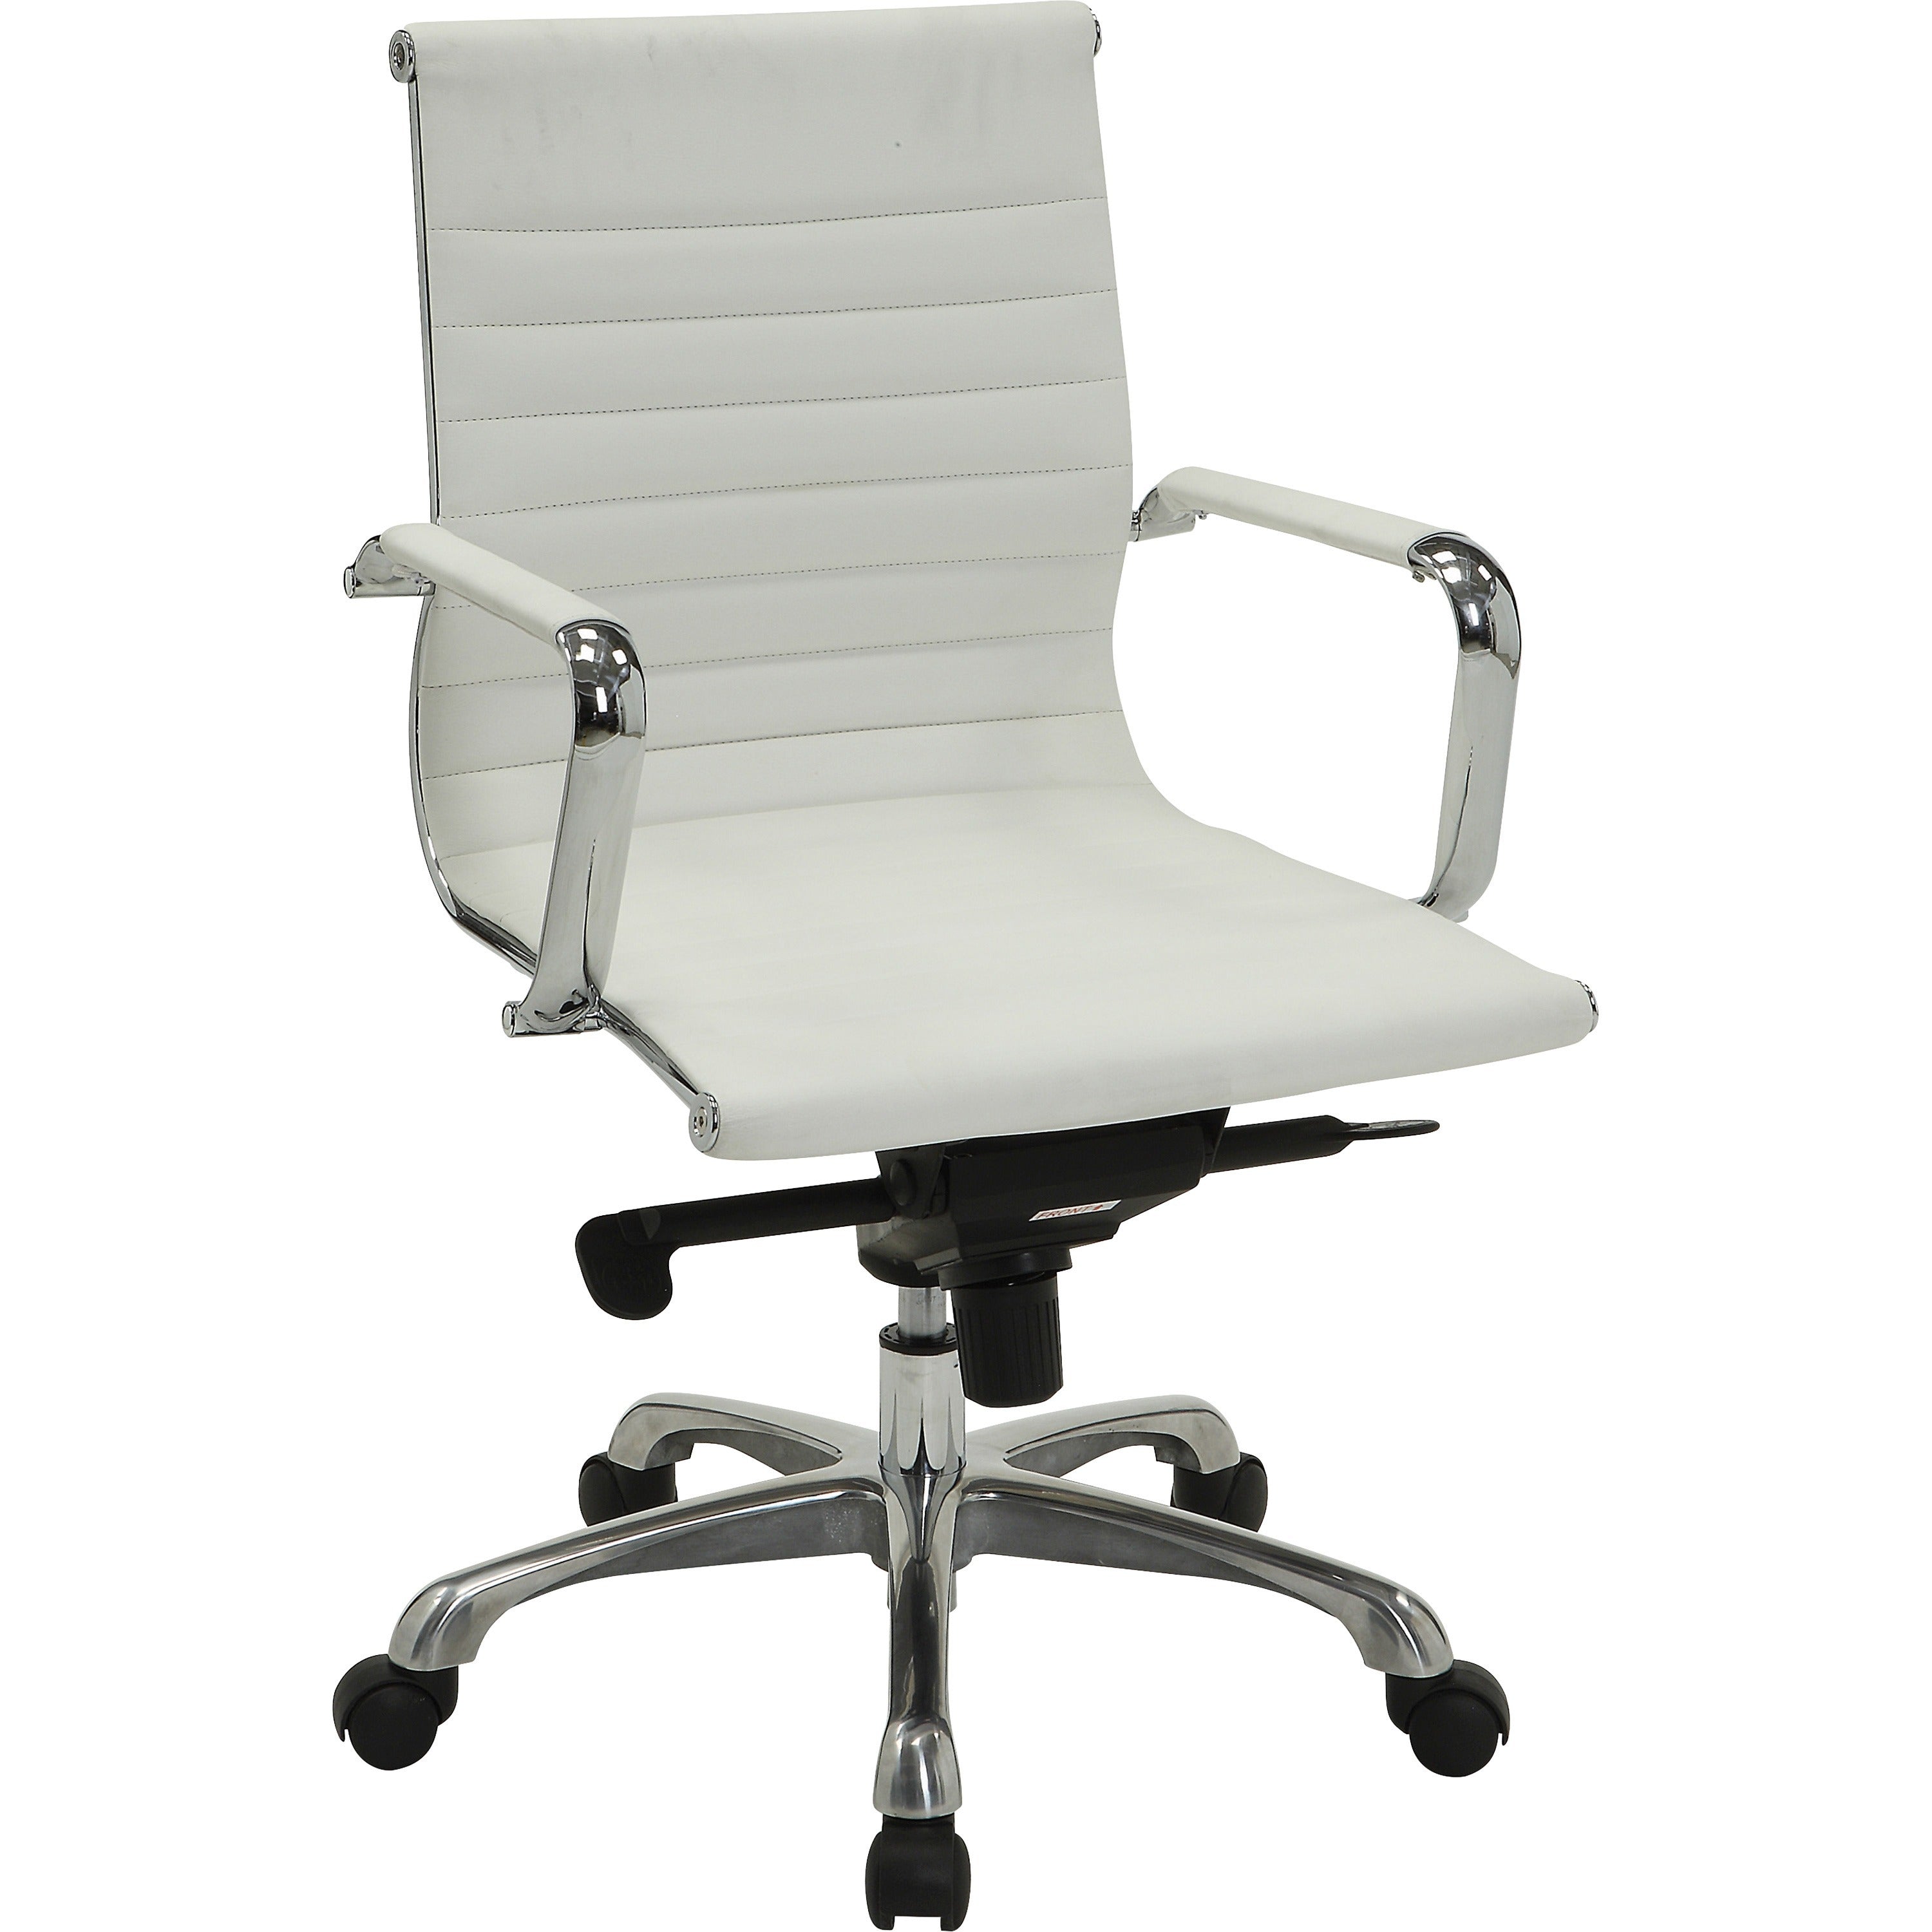 lorell-modern-managerial-mid-back-office-chair-bonded-leather-seat-bonded-leather-back-mid-back-5-star-base-white-1-each_llr59503 - 1